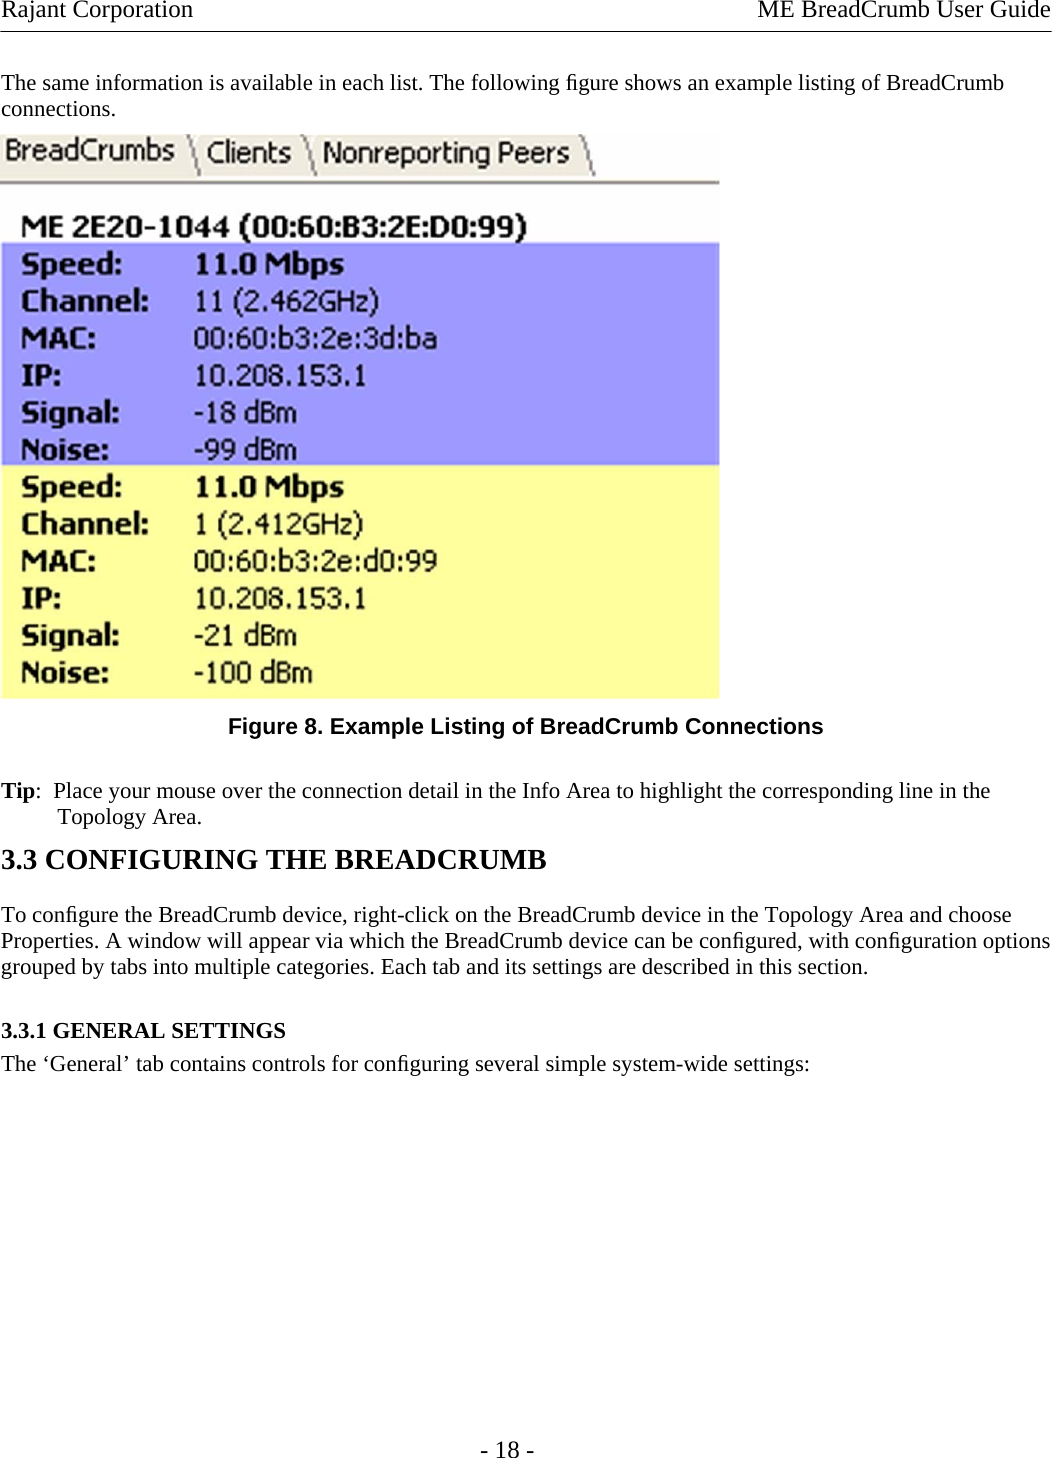 Rajant Corporation    ME BreadCrumb User Guide  The same information is available in each list. The following ﬁgure shows an example listing of BreadCrumb connections.   Figure 8. Example Listing of BreadCrumb Connections Tip:  Place your mouse over the connection detail in the Info Area to highlight the corresponding line in the Topology Area.  3.3 CONFIGURING THE BREADCRUMB  To conﬁgure the BreadCrumb device, right-click on the BreadCrumb device in the Topology Area and choose Properties. A window will appear via which the BreadCrumb device can be conﬁgured, with conﬁguration options grouped by tabs into multiple categories. Each tab and its settings are described in this section. 3.3.1 GENERAL SETTINGS  The ‘General’ tab contains controls for conﬁguring several simple system-wide settings:  - 18 - 